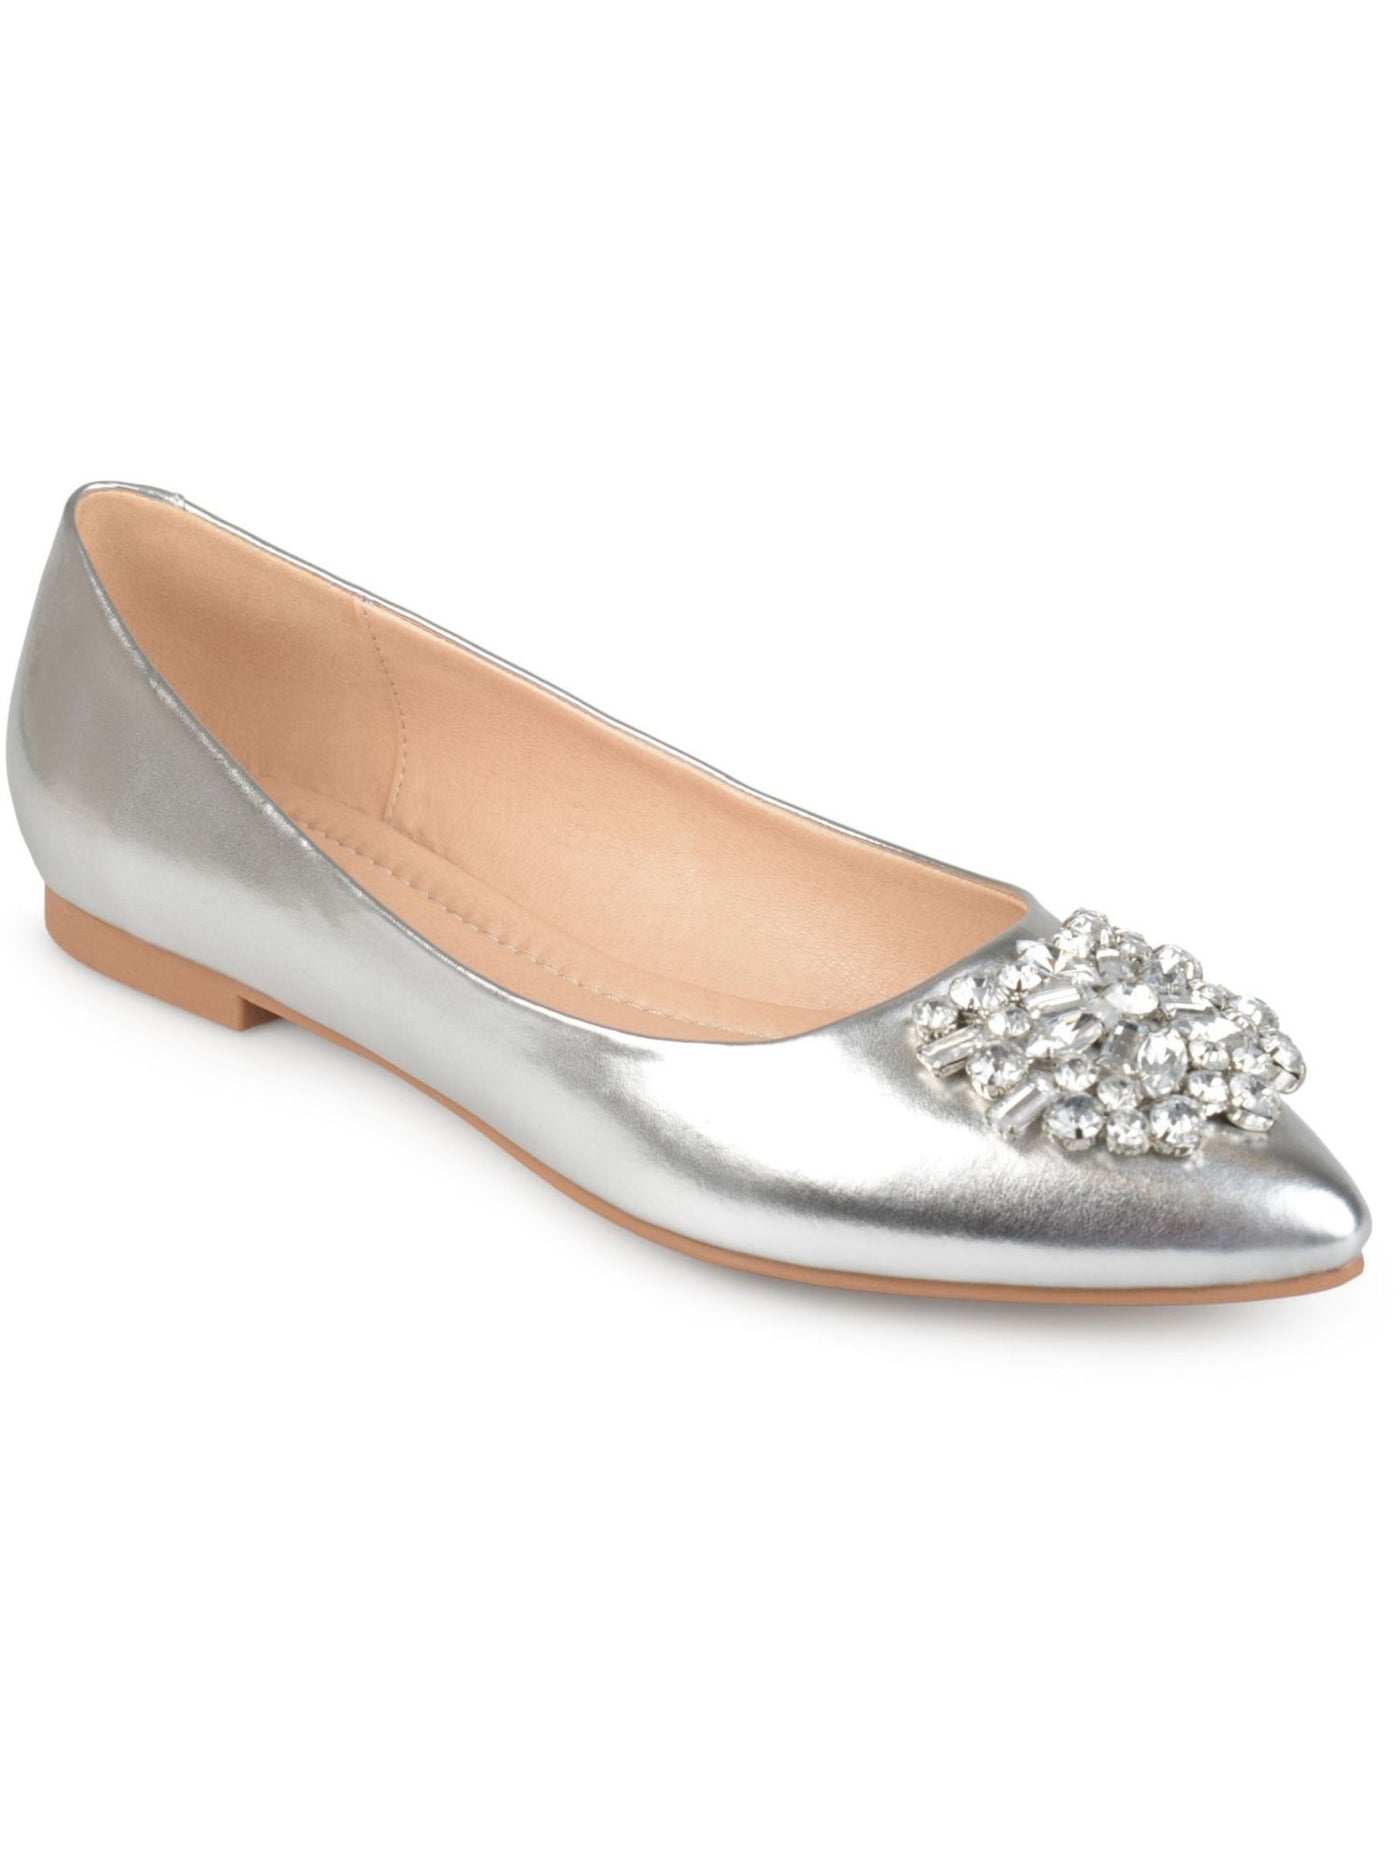 JOURNEE COLLECTION Womens Silver Embellished Padded Renzo Pointed Toe Slip On Flats Shoes 6.5 W